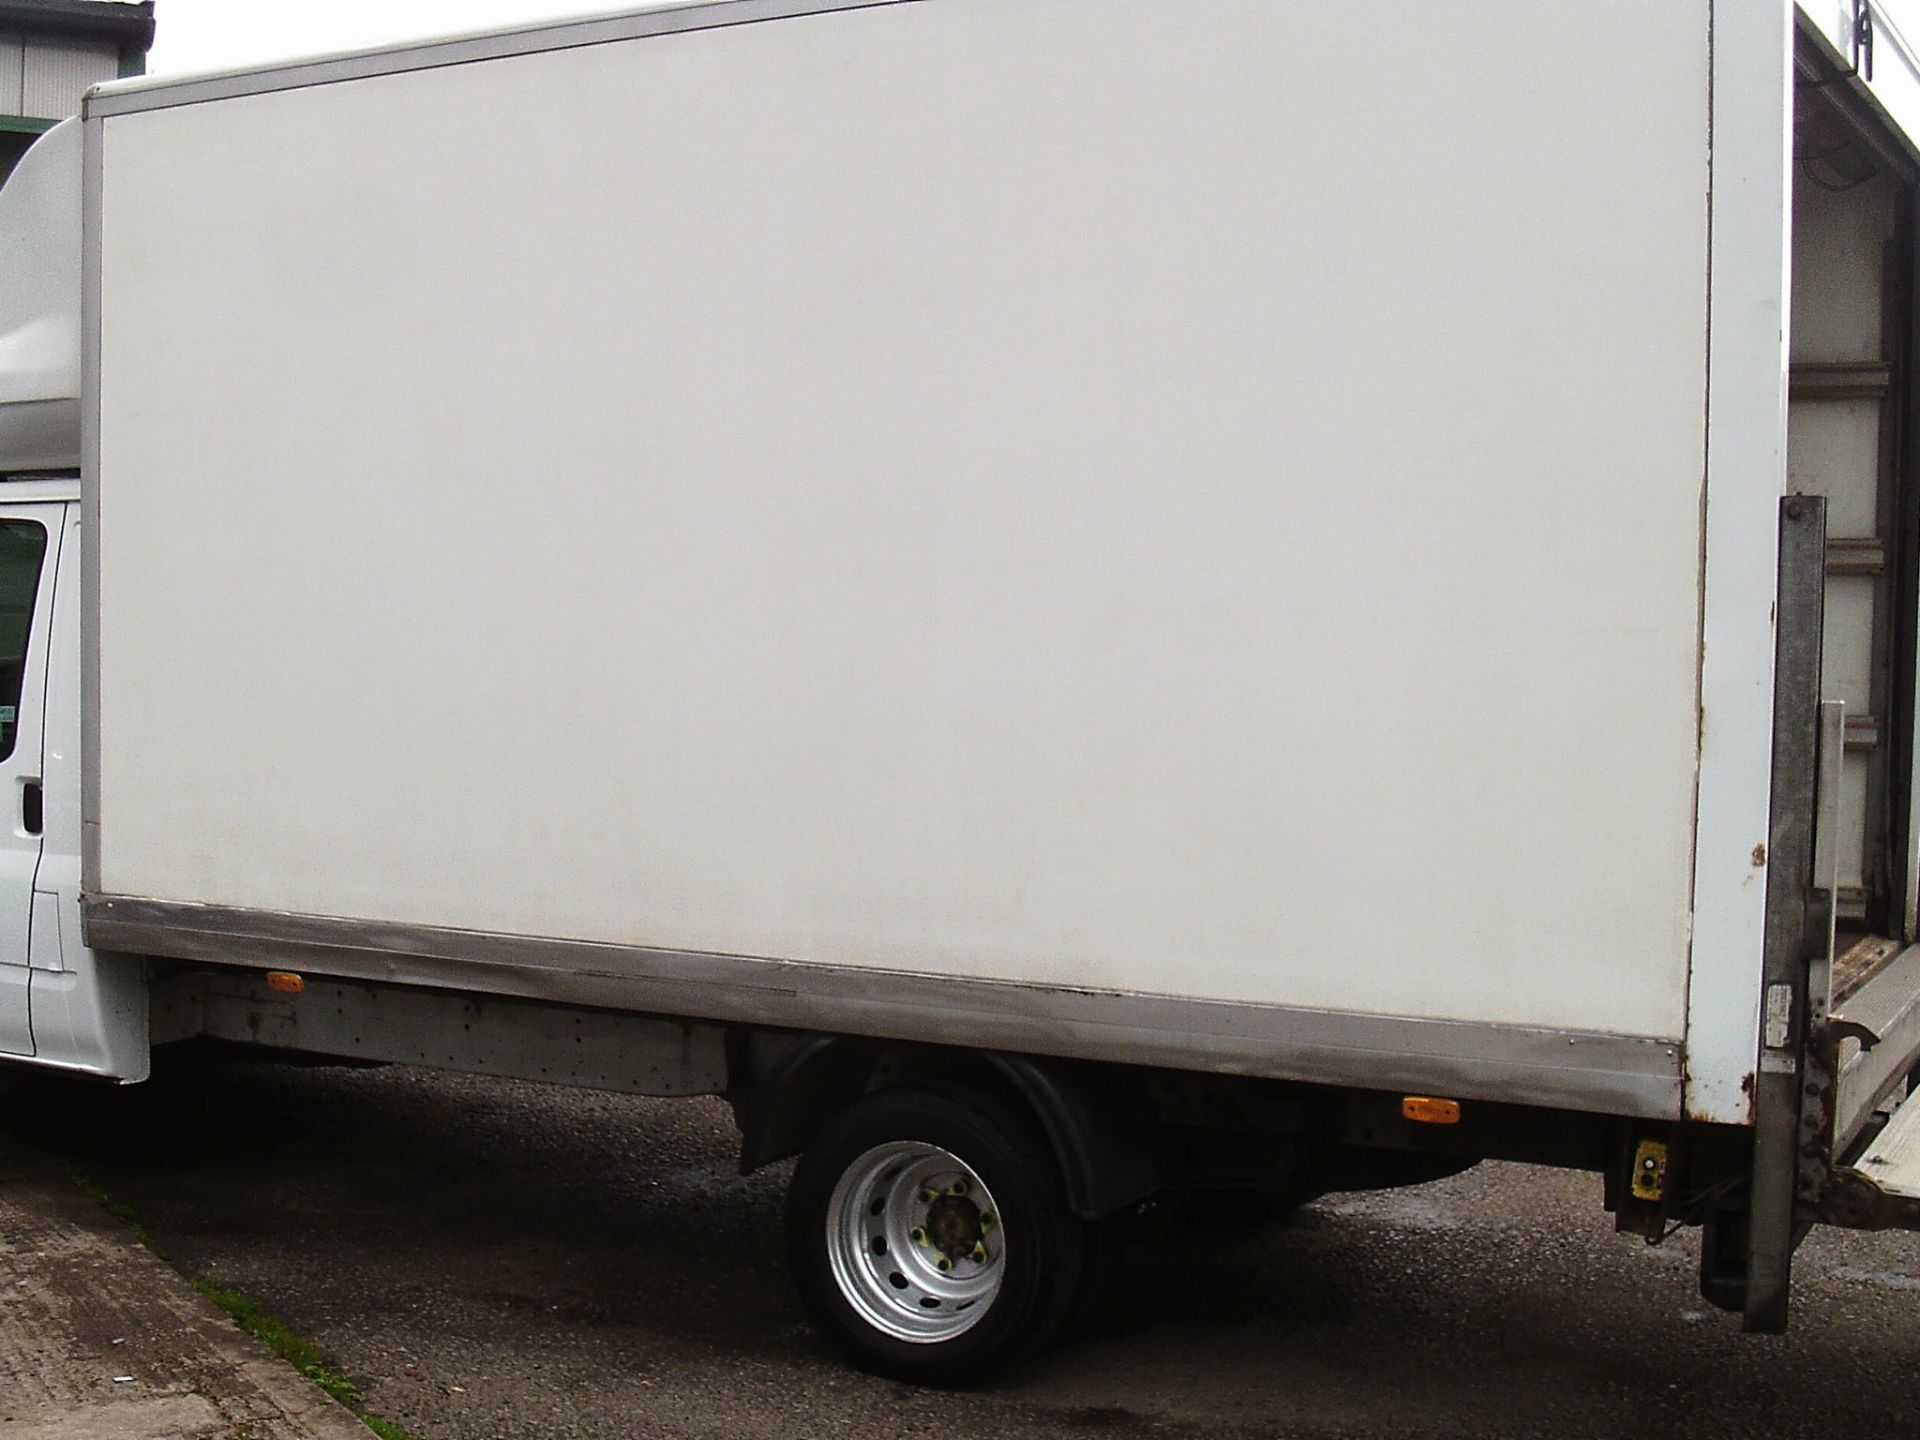 2012/12 REG FORD TRANSIT 125 T350 RWD 2.2 DIESEL LUTON BOX VAN WITH TAIL LIFT, 2 FORMER KEEPERS - Image 4 of 12